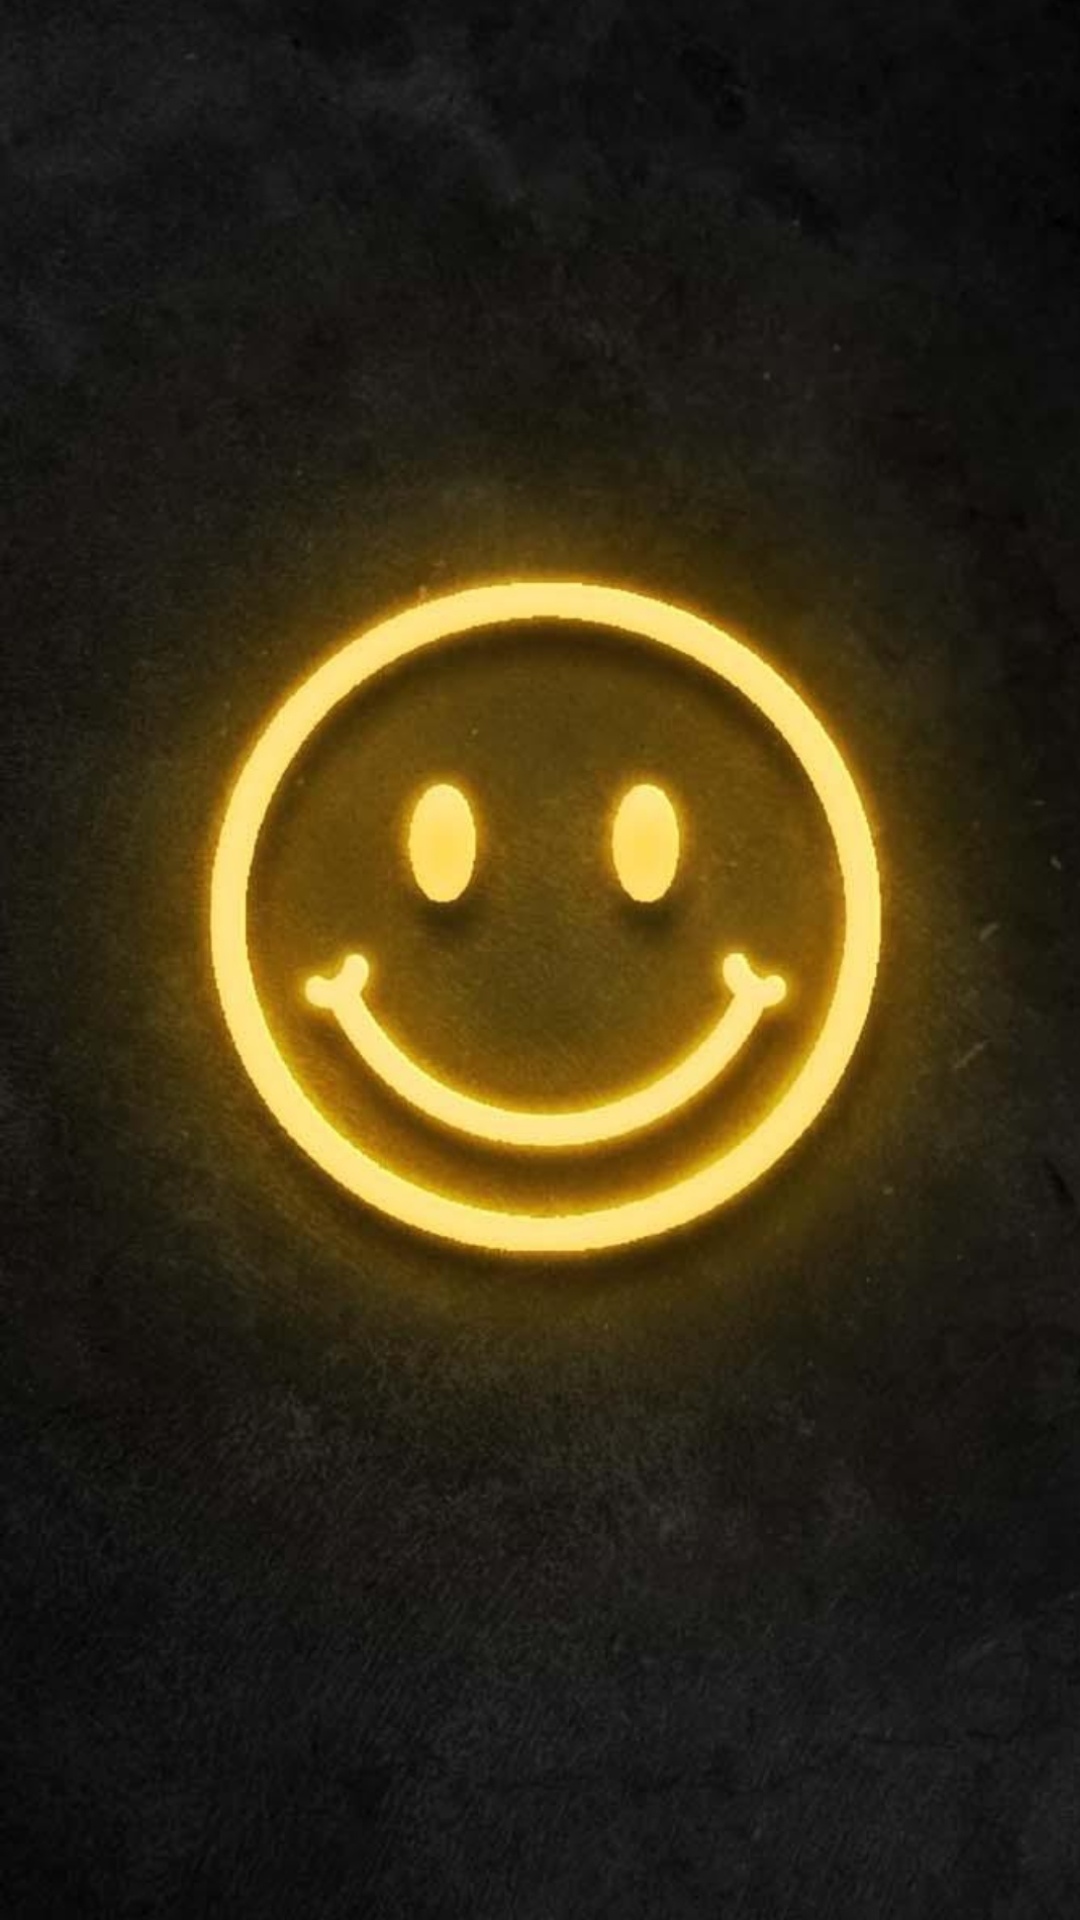 Smiley Face Android Wallpaper